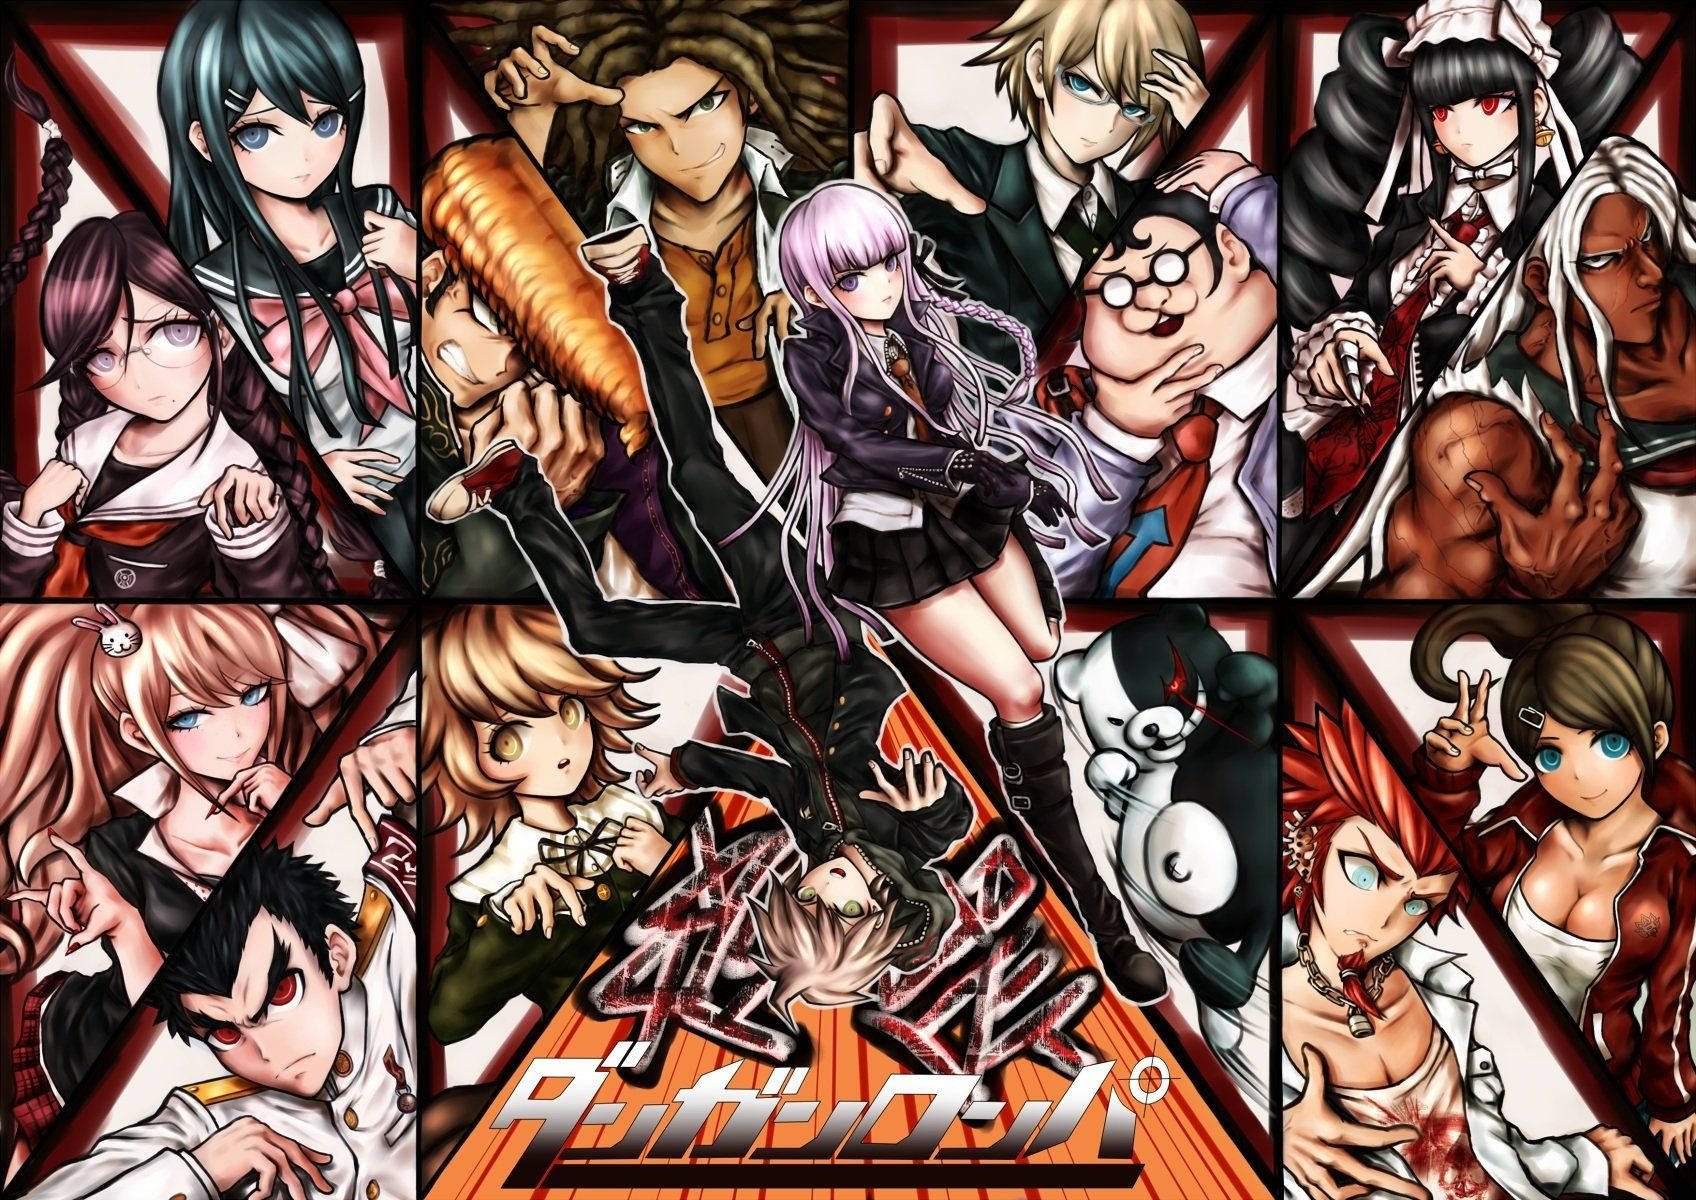 Join The Fun With The Heroes of Danganronpa Wallpaper